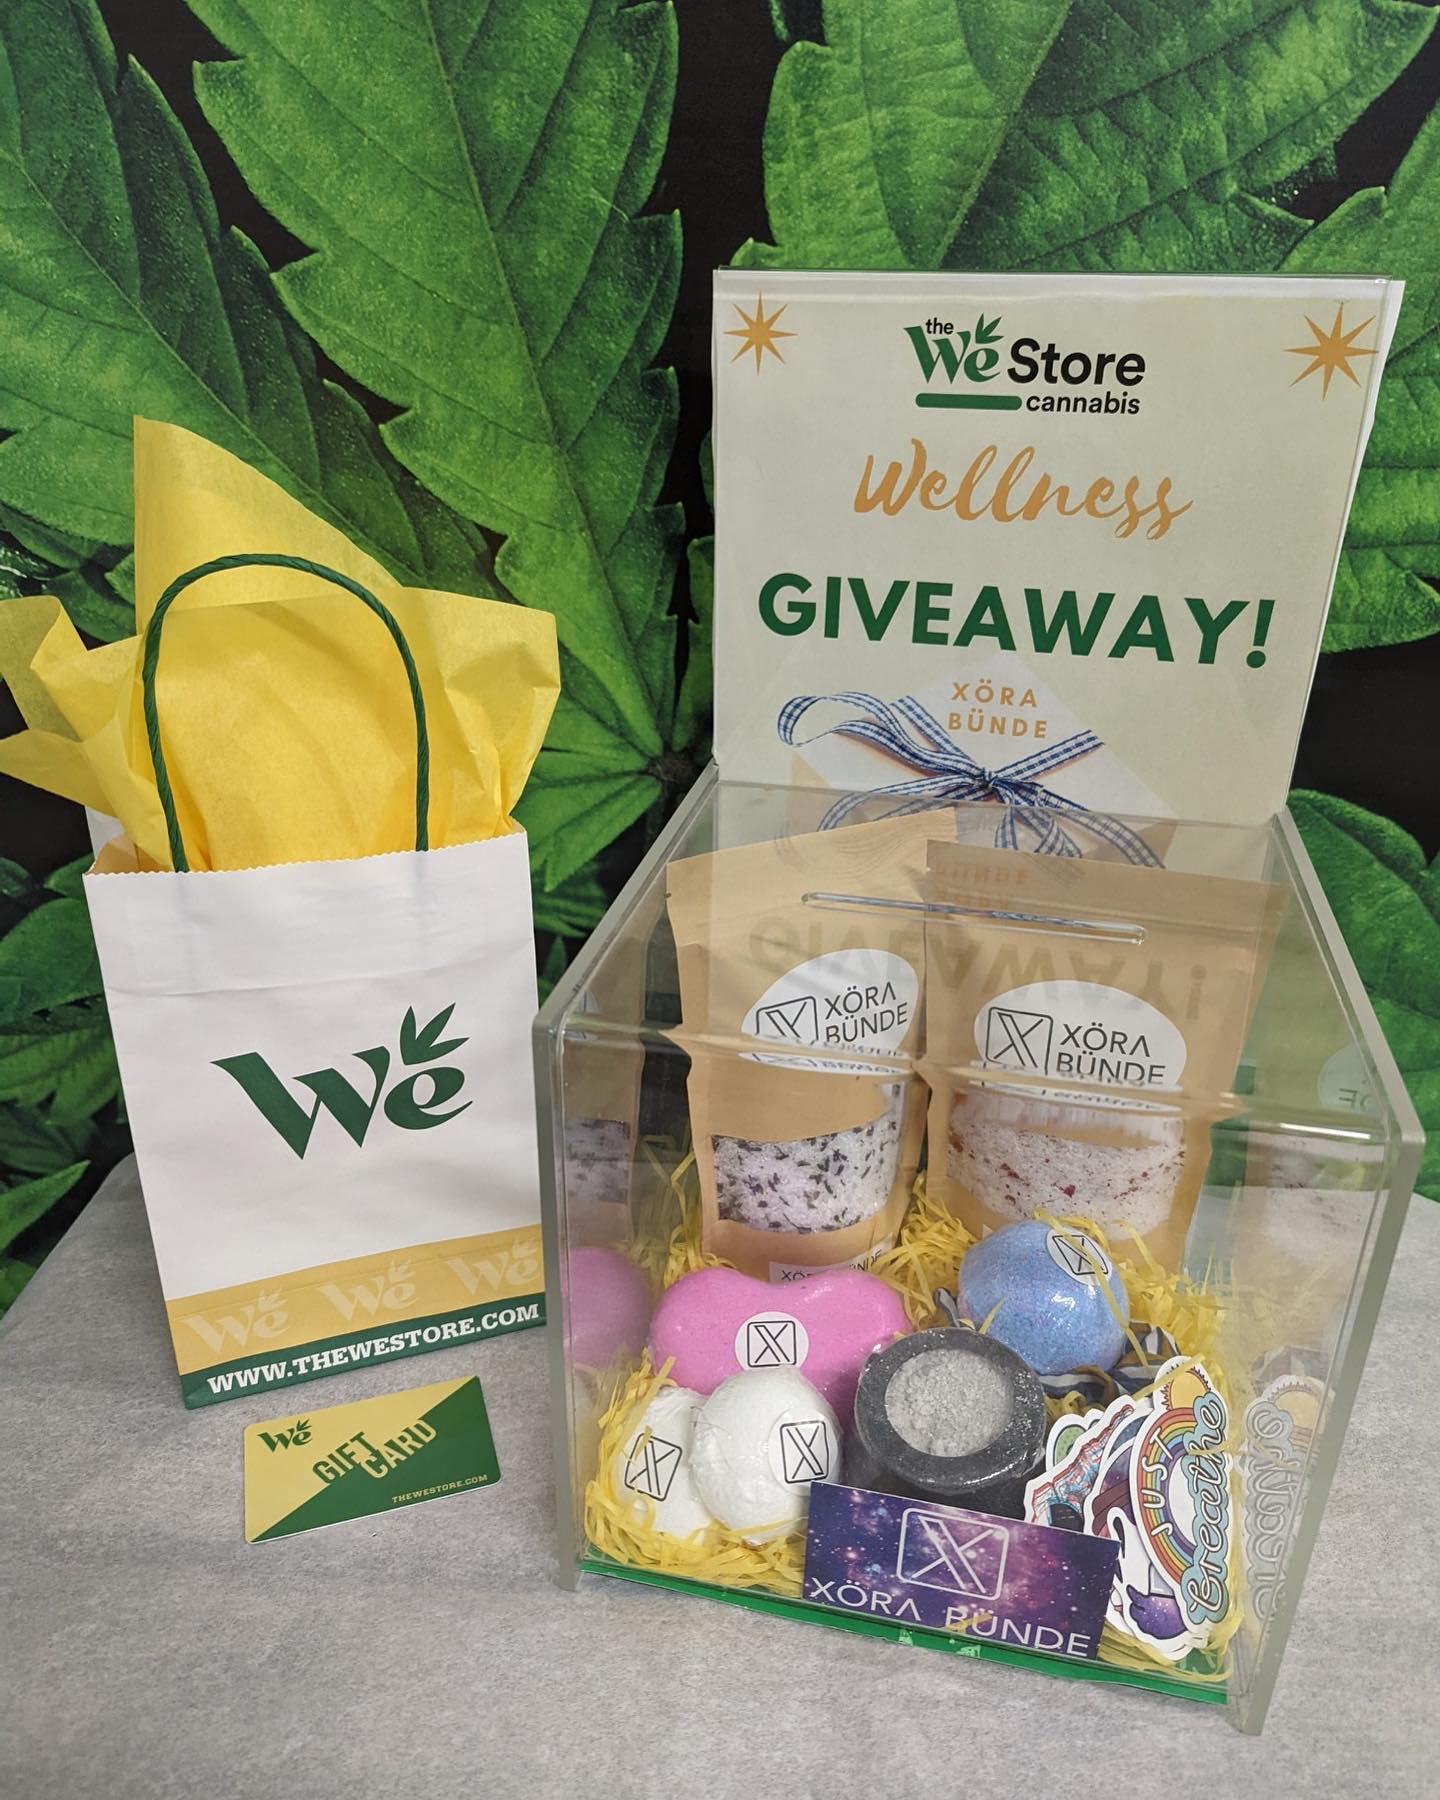 🎉Mothers Day Wellness Giveaway🎉 

🌸 For this year's Mother’s Day, We partnered up with @xorabunde for an ultimate wellness basket featuring unique locally produced products from @xorabunde and a $50 WeStore gift card 🛁

🎁To enter giveaway🎁

1. Like this post 👍🏽
2. Tag 3 friends in the comments 🫶🏼
3. Follow @westorecdn and @xorabunde ✨

⭐️The winner will be announced on Sunday, May 8!⭐️

#mothersday #wellness #bathbomb #shoplocal #smallbusiness #supportsmallbusiness #westore #cks #yqg